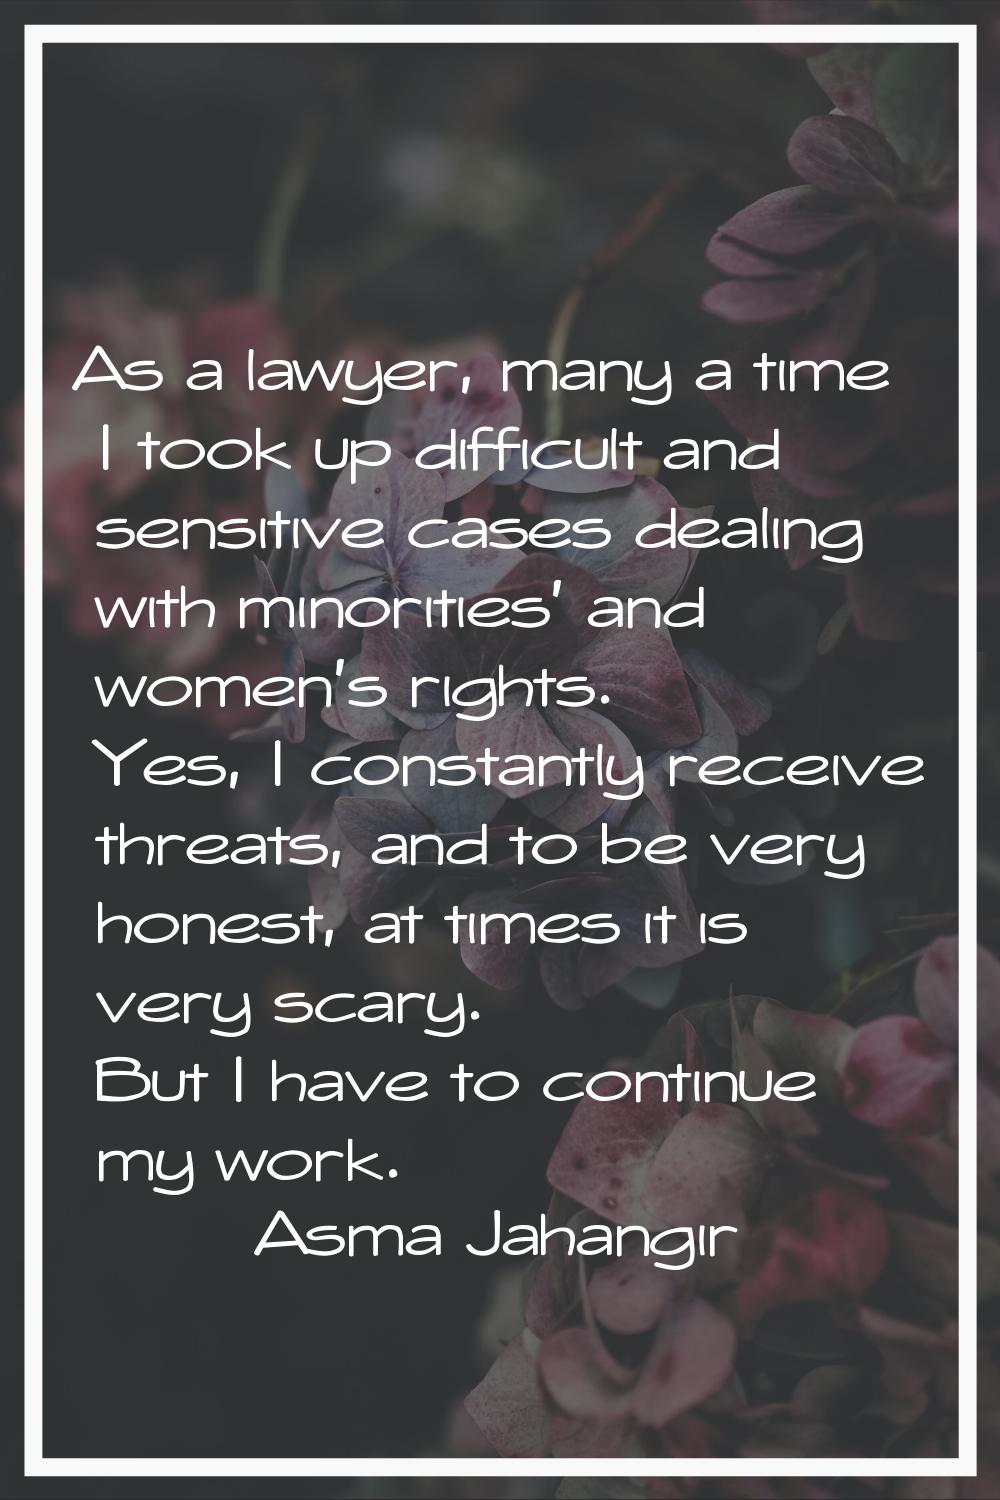 As a lawyer, many a time I took up difficult and sensitive cases dealing with minorities' and women